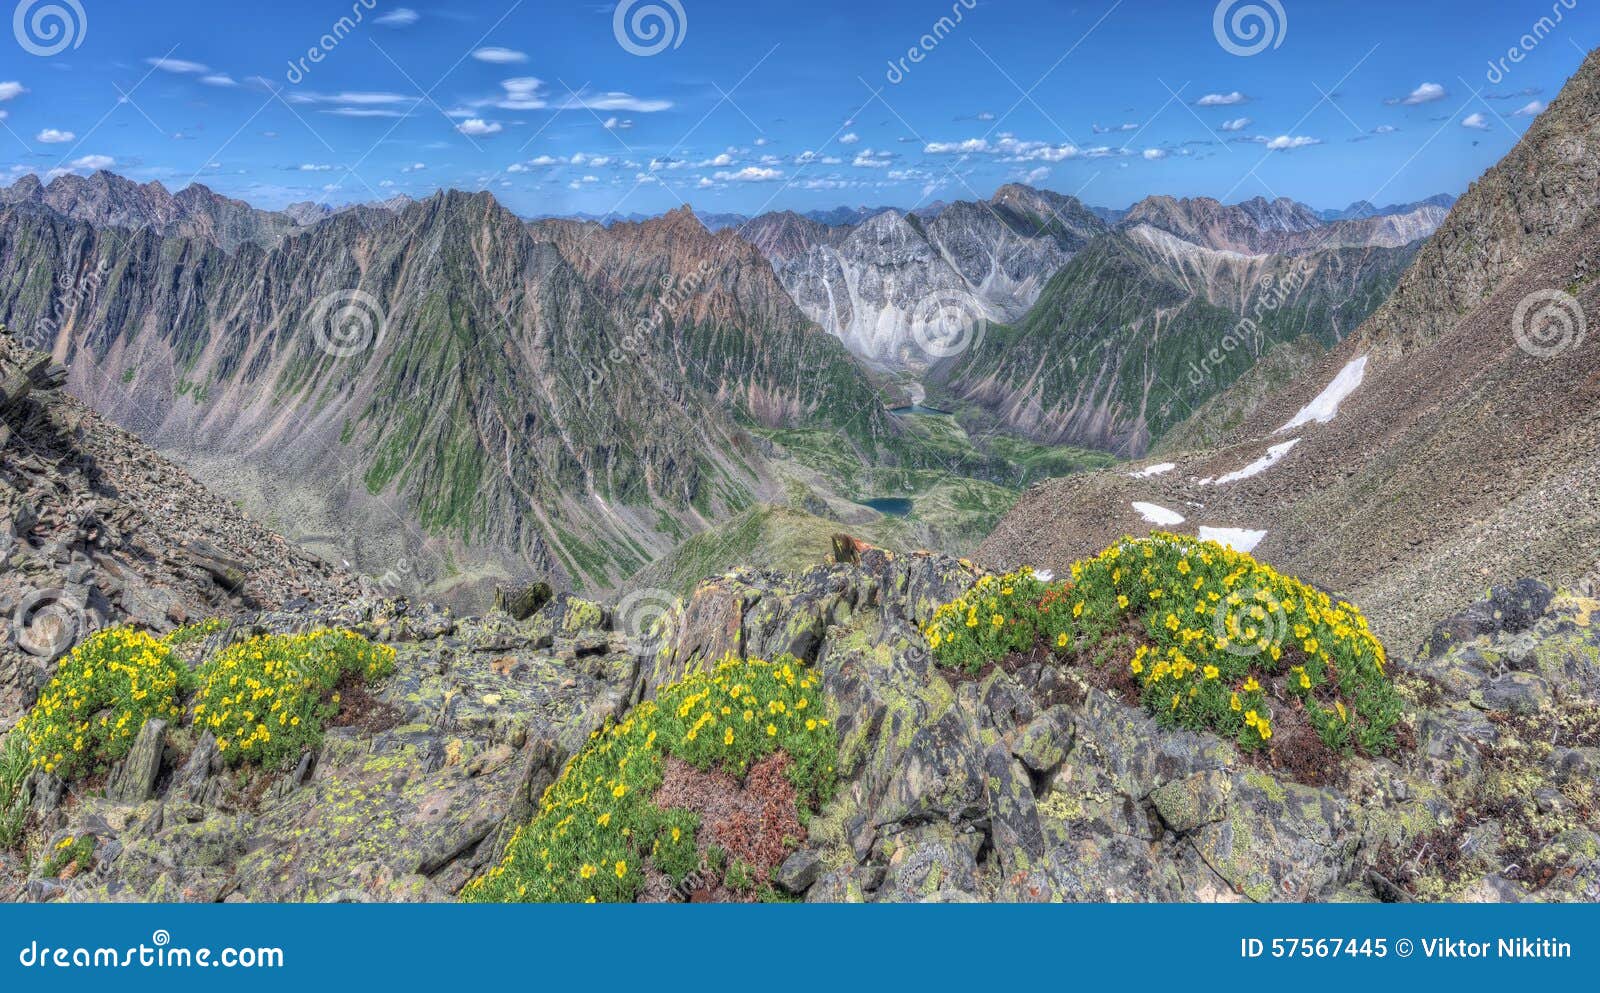 yellow flowers (potentilla biflora) on a background of mountain ranges